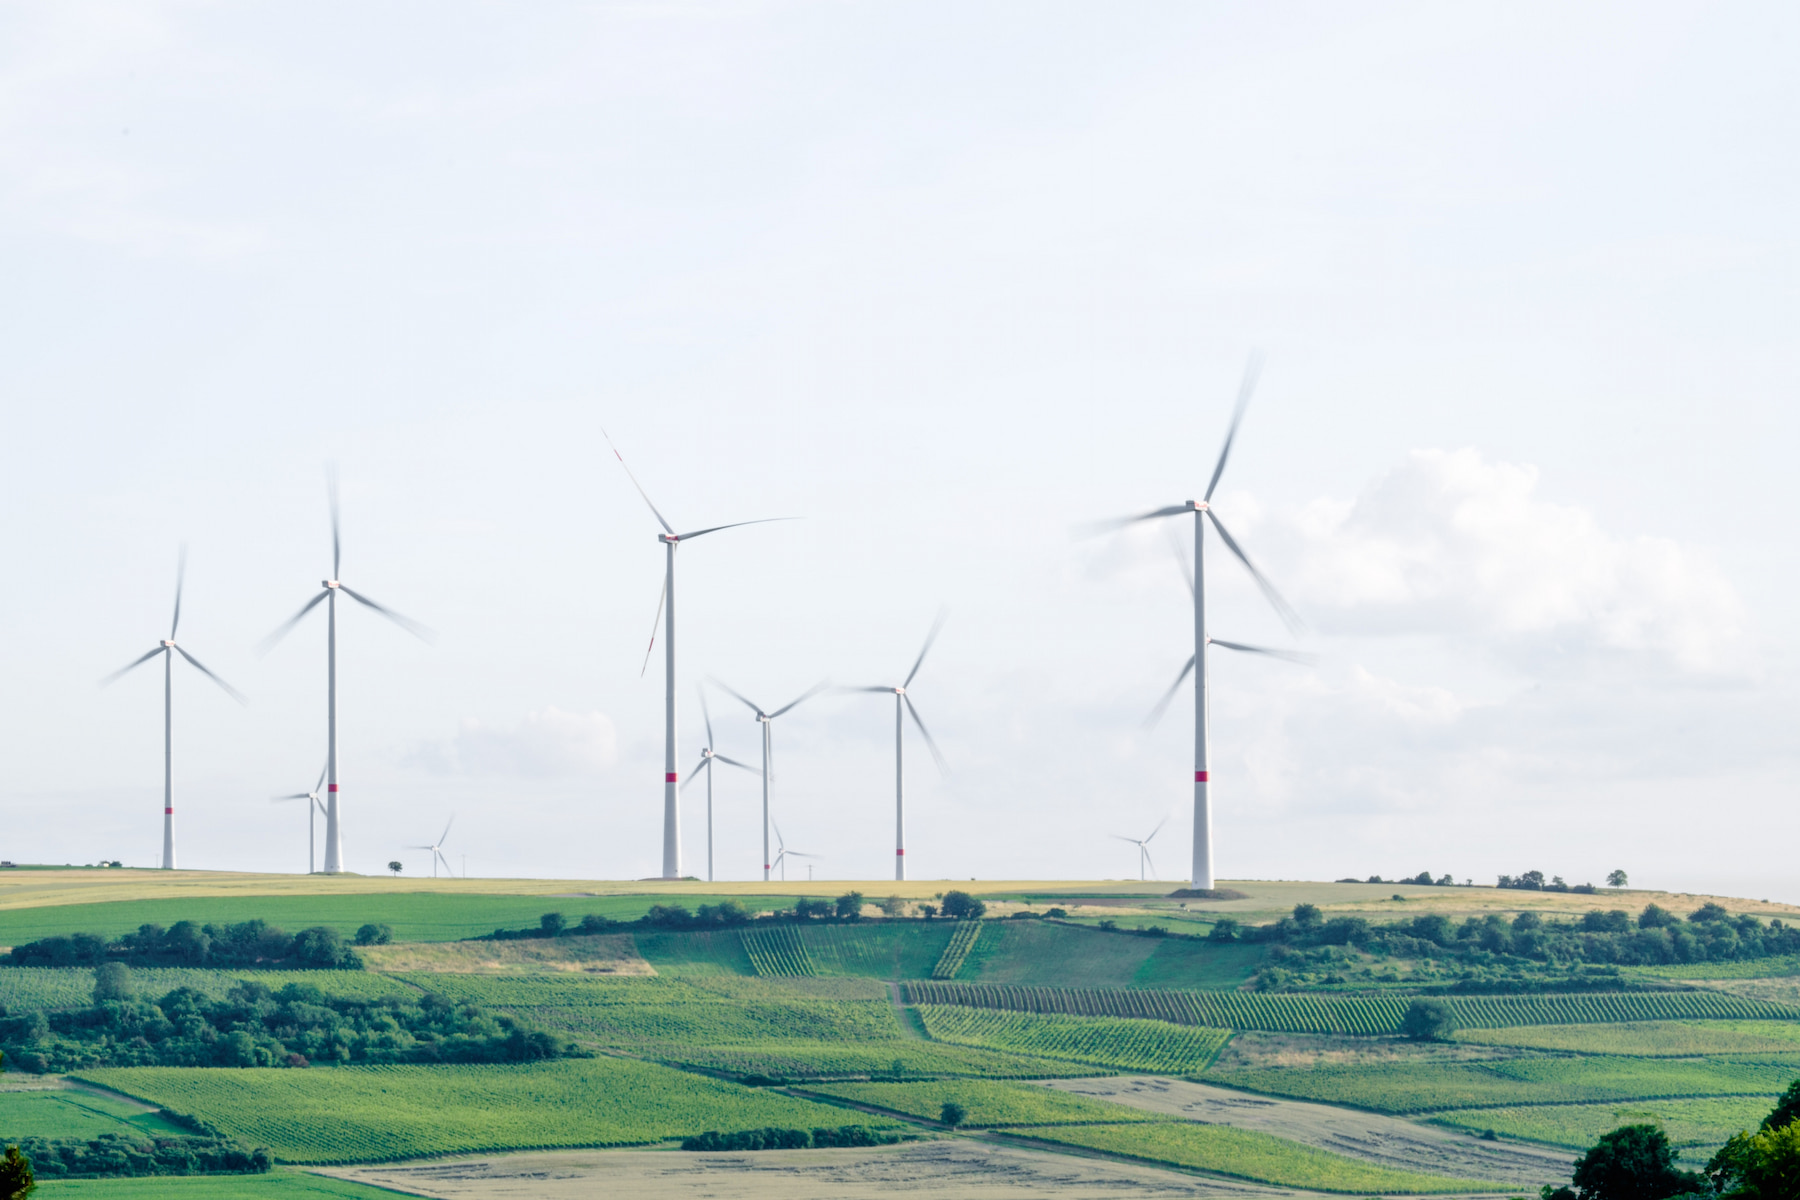 A group of wind turbines in a hilly landscape